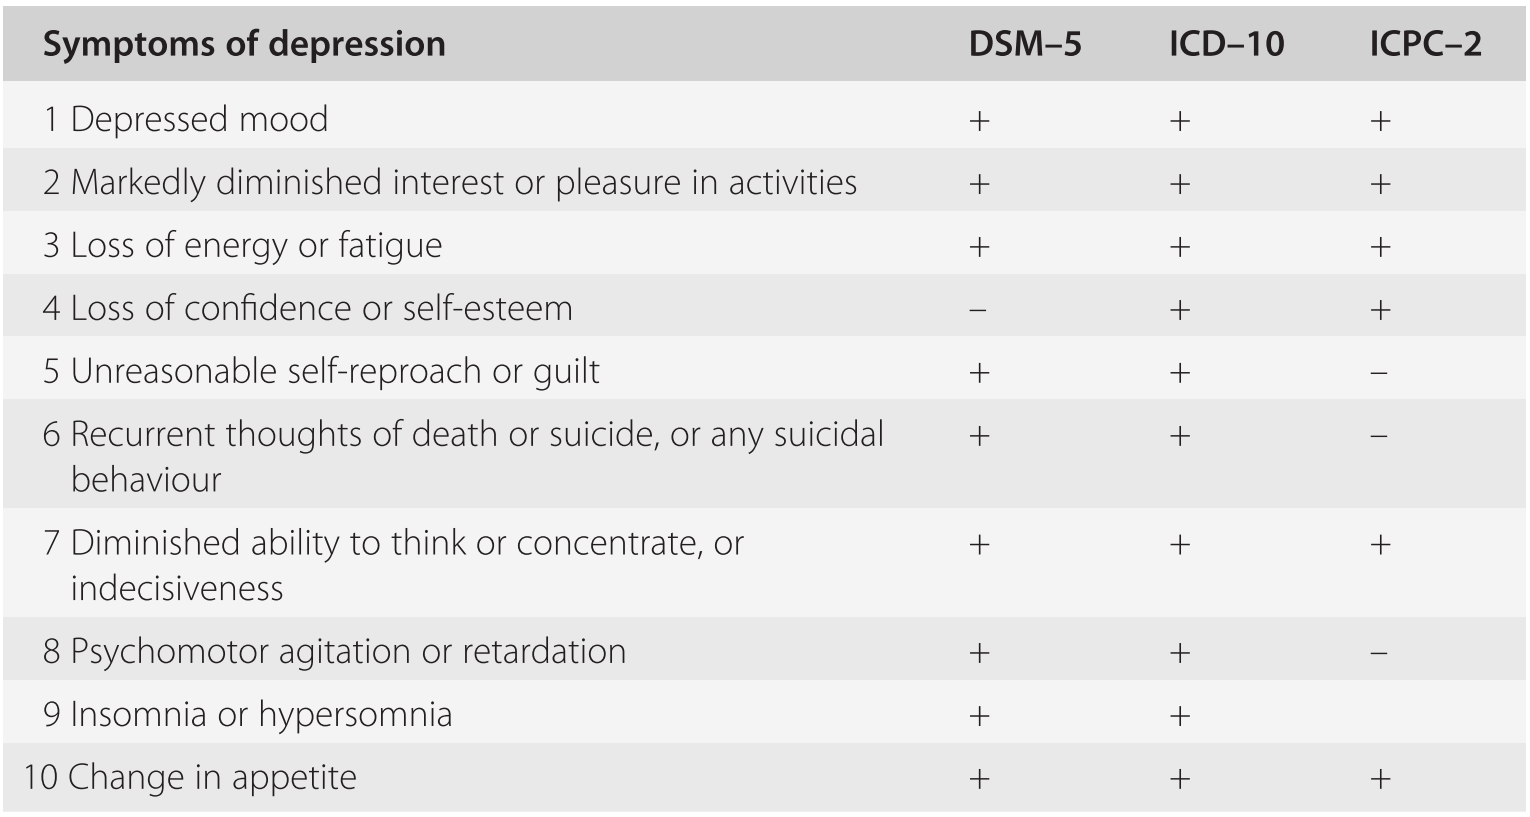 icd 10 code for depression